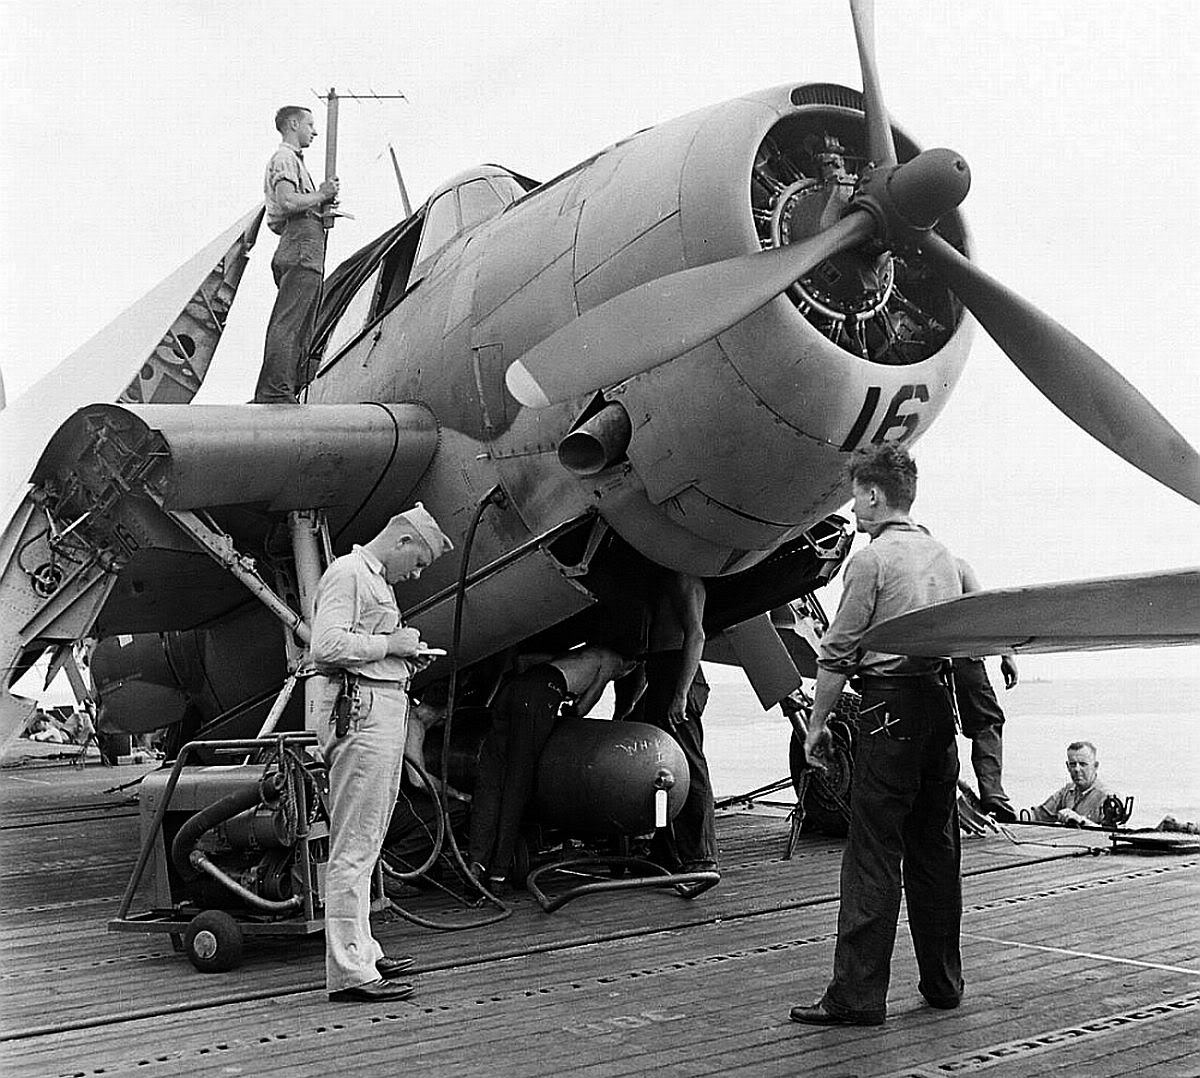 TBM-1 Avenger on a carrier deck, 1942-44. Note Mark XIII torpedo and crewman on top of the airplane handling an antenna from the ASB radar system.